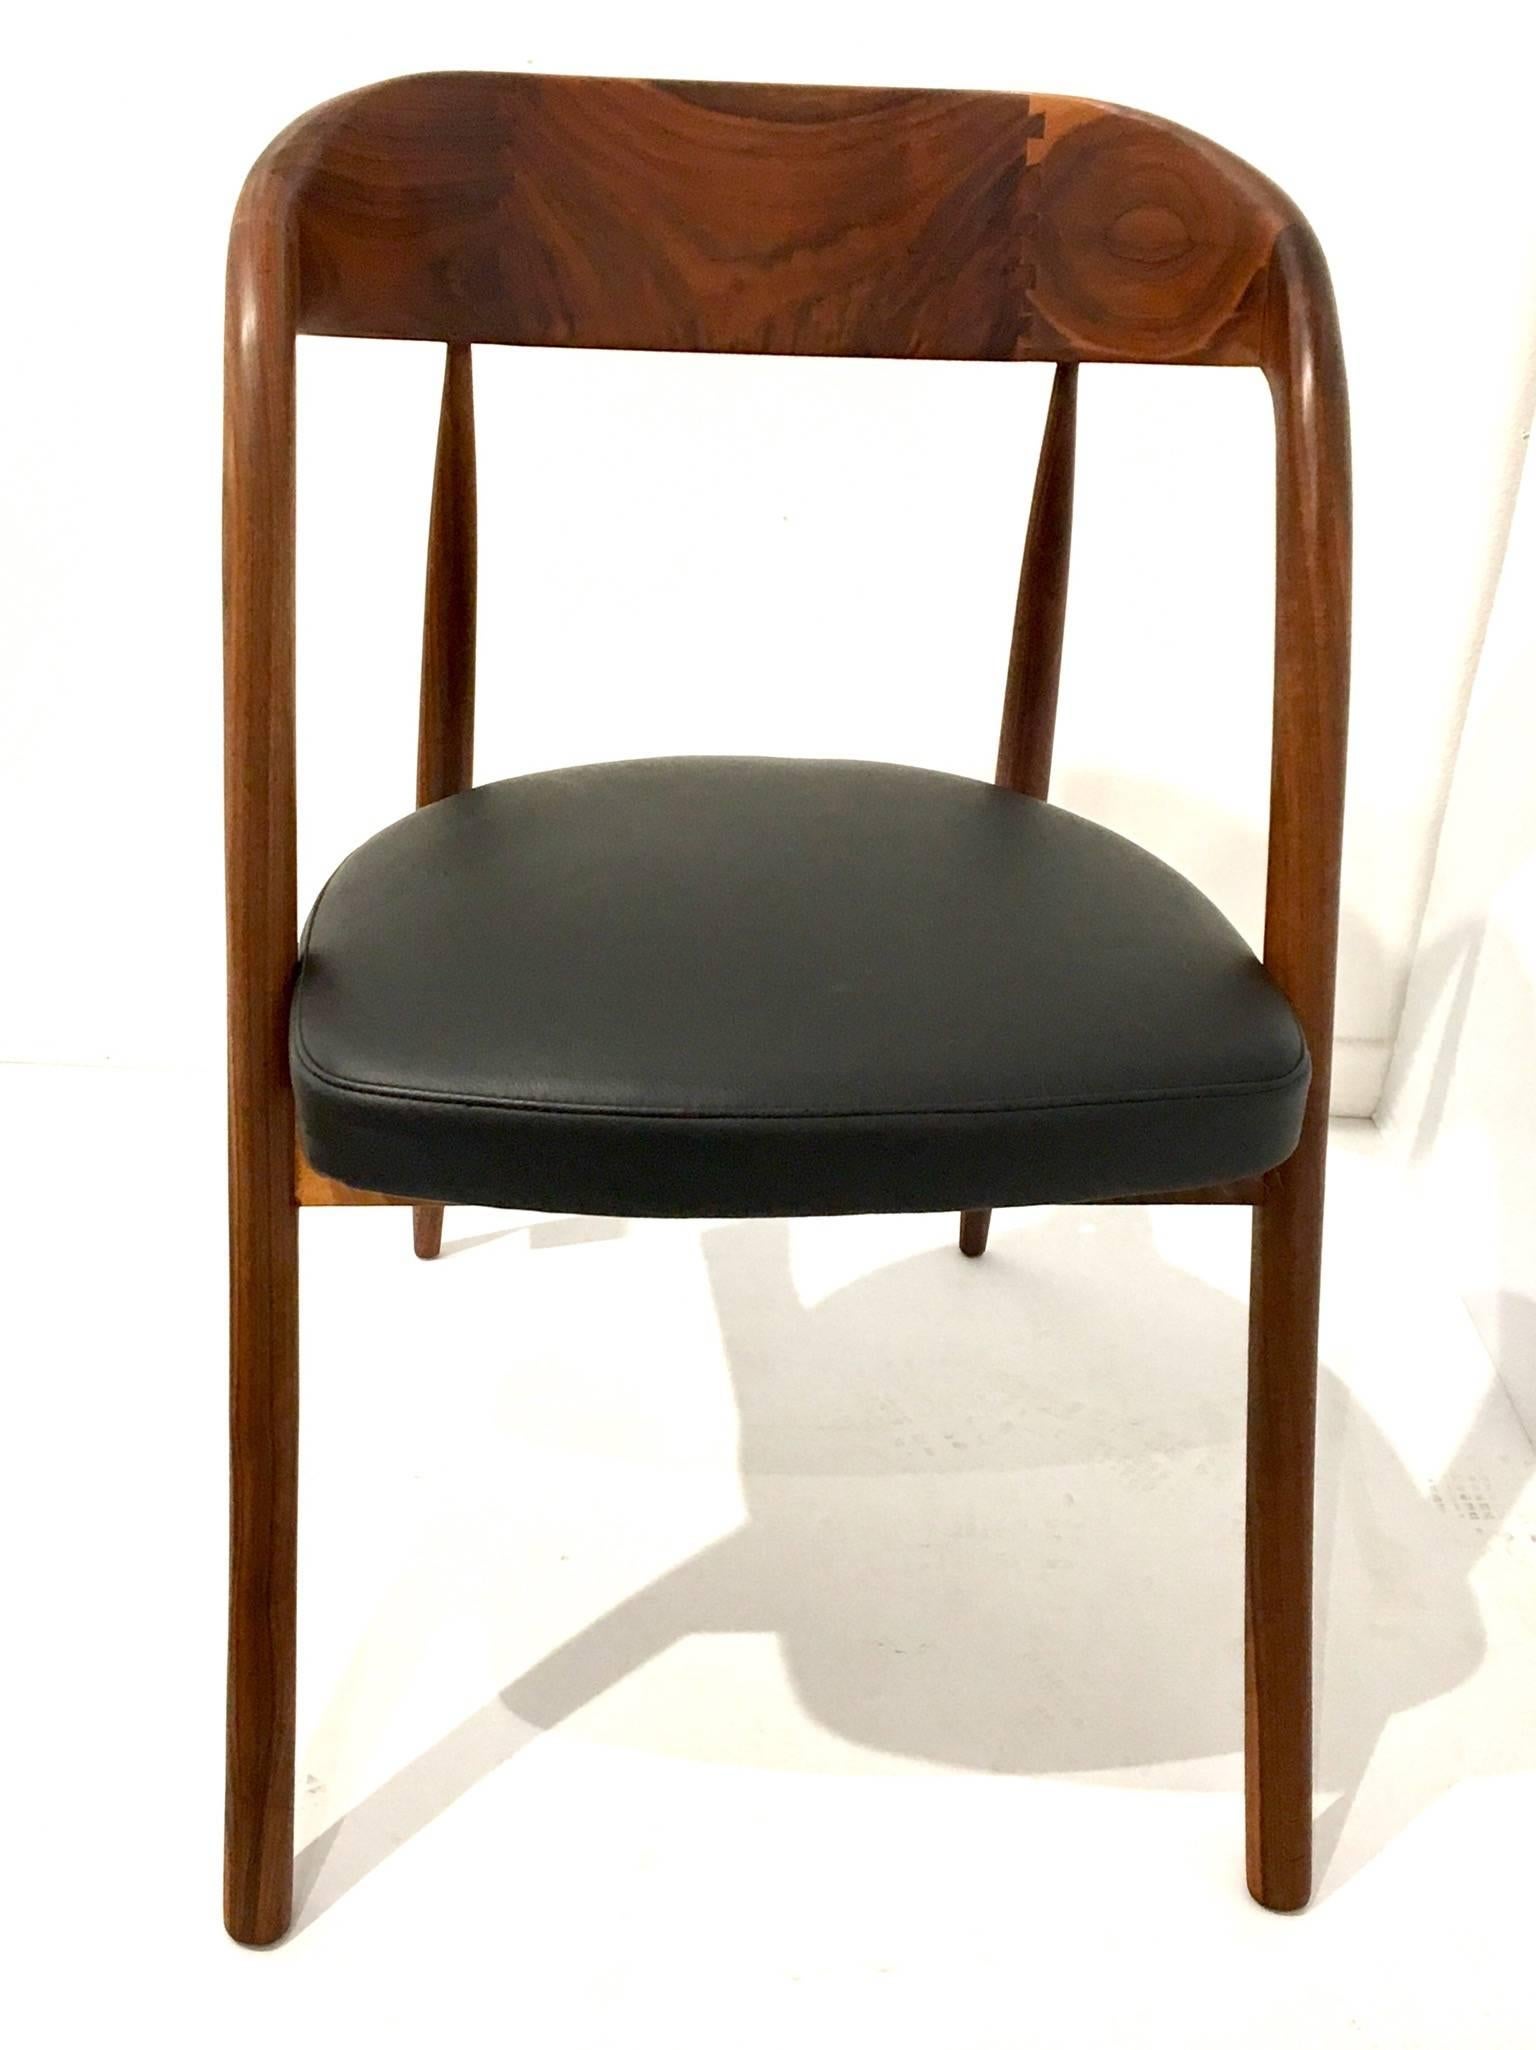 An incredible solid walnut frame chair in the style of Sam Maloof, circa 1950s freshly refinished and recover the seat in black Naugahyde, in credible craftsmanship solid and sturdy , a piece of art. Dovetail back support.